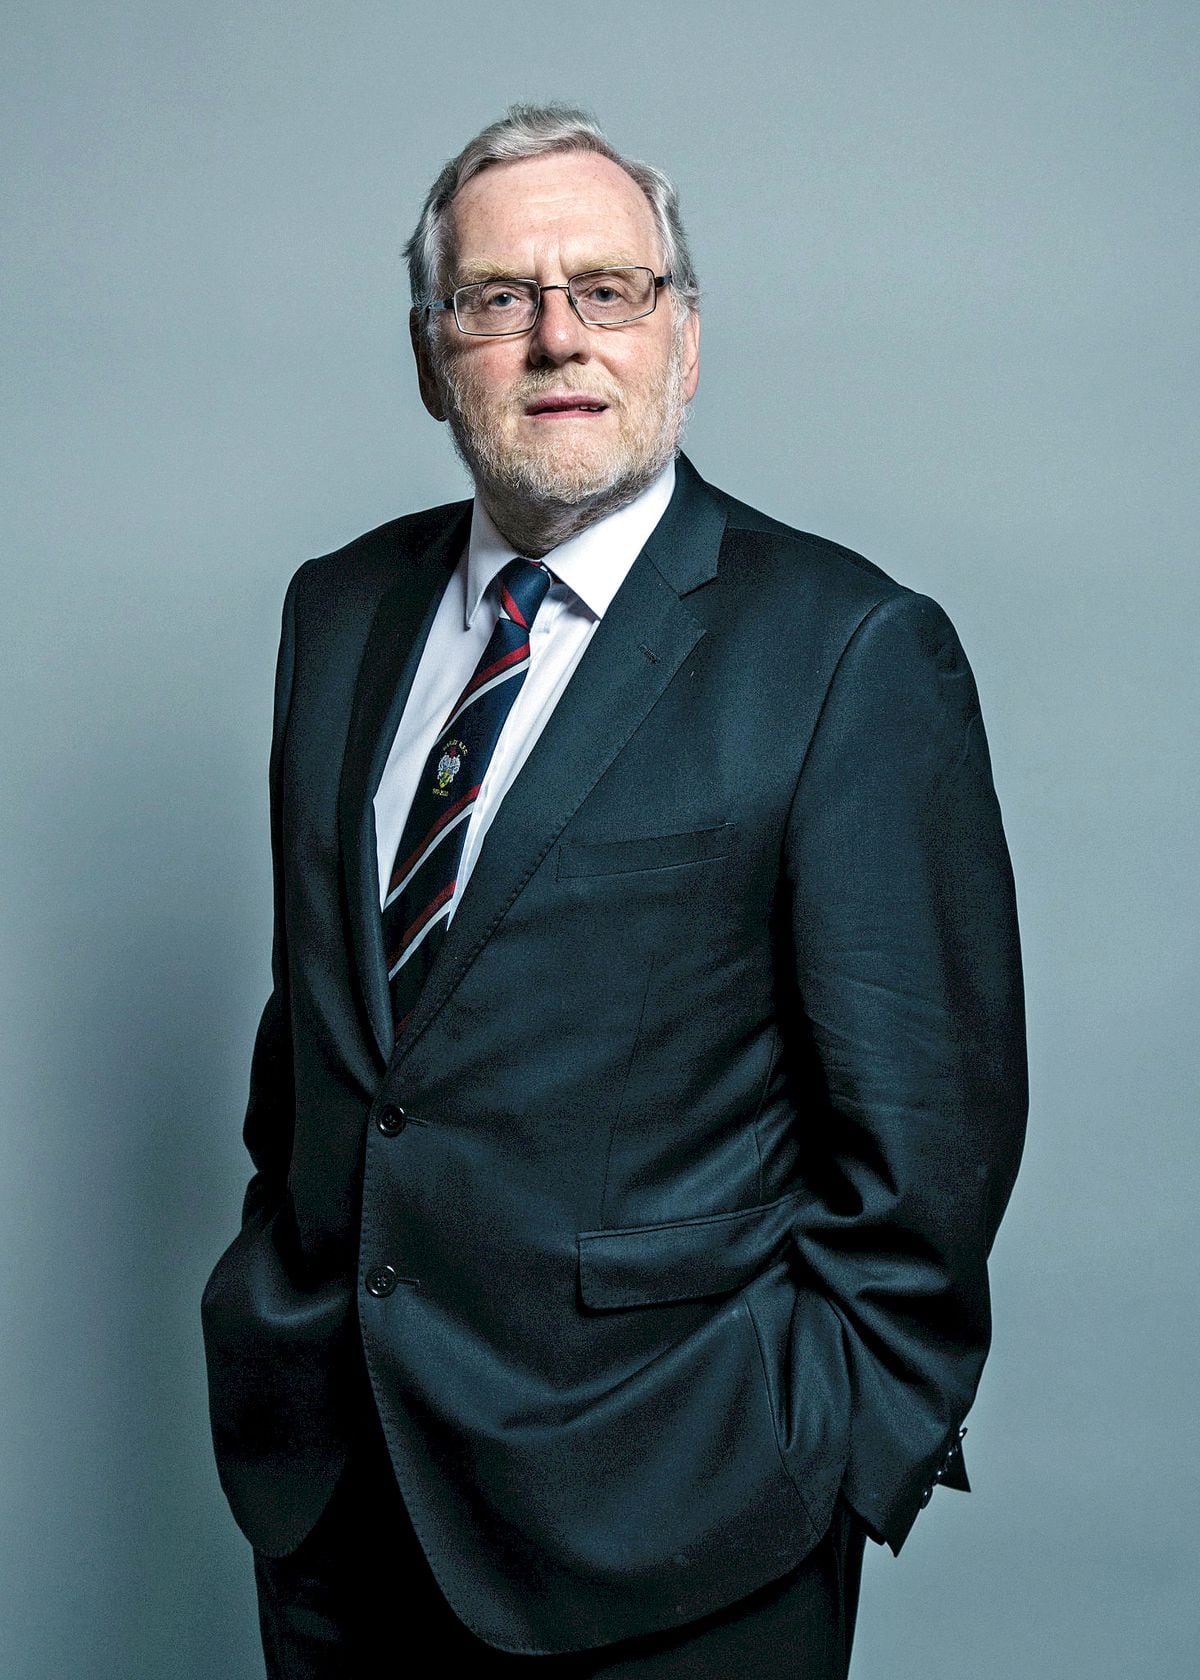 MP John Spellar says he's not the person to speak to over the matter